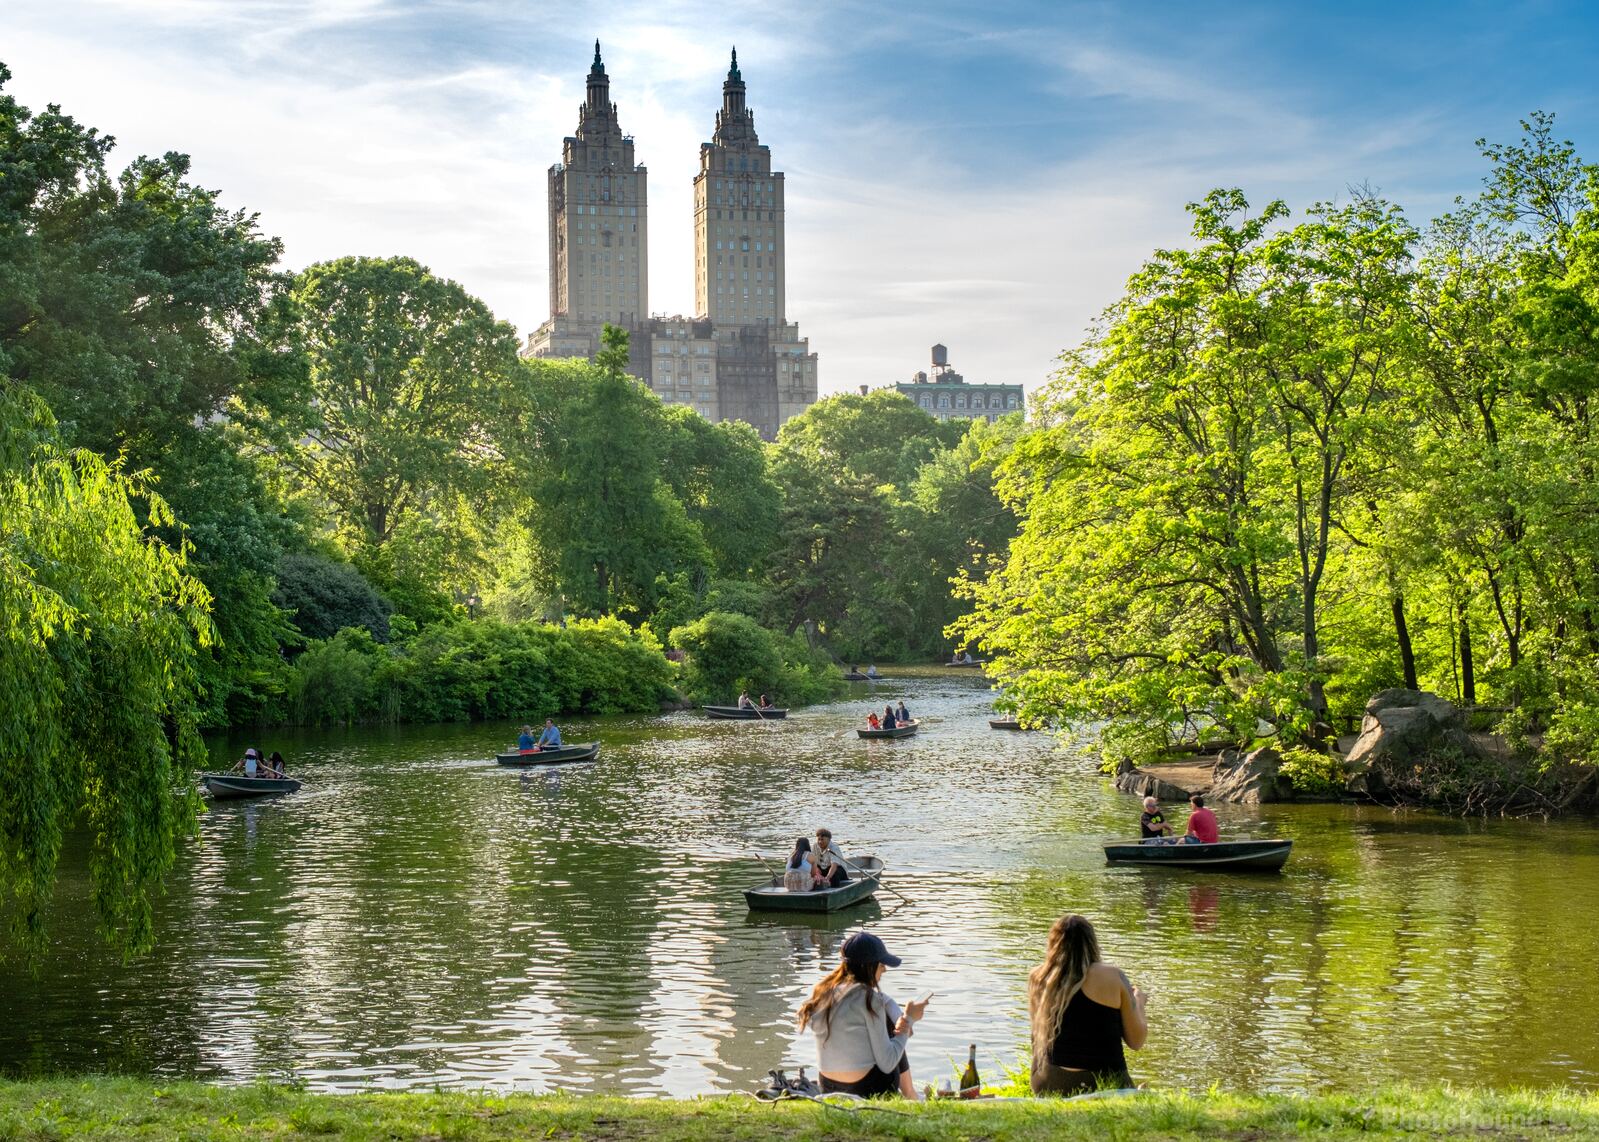 Image of Central Park - W 59th Street by Team PhotoHound